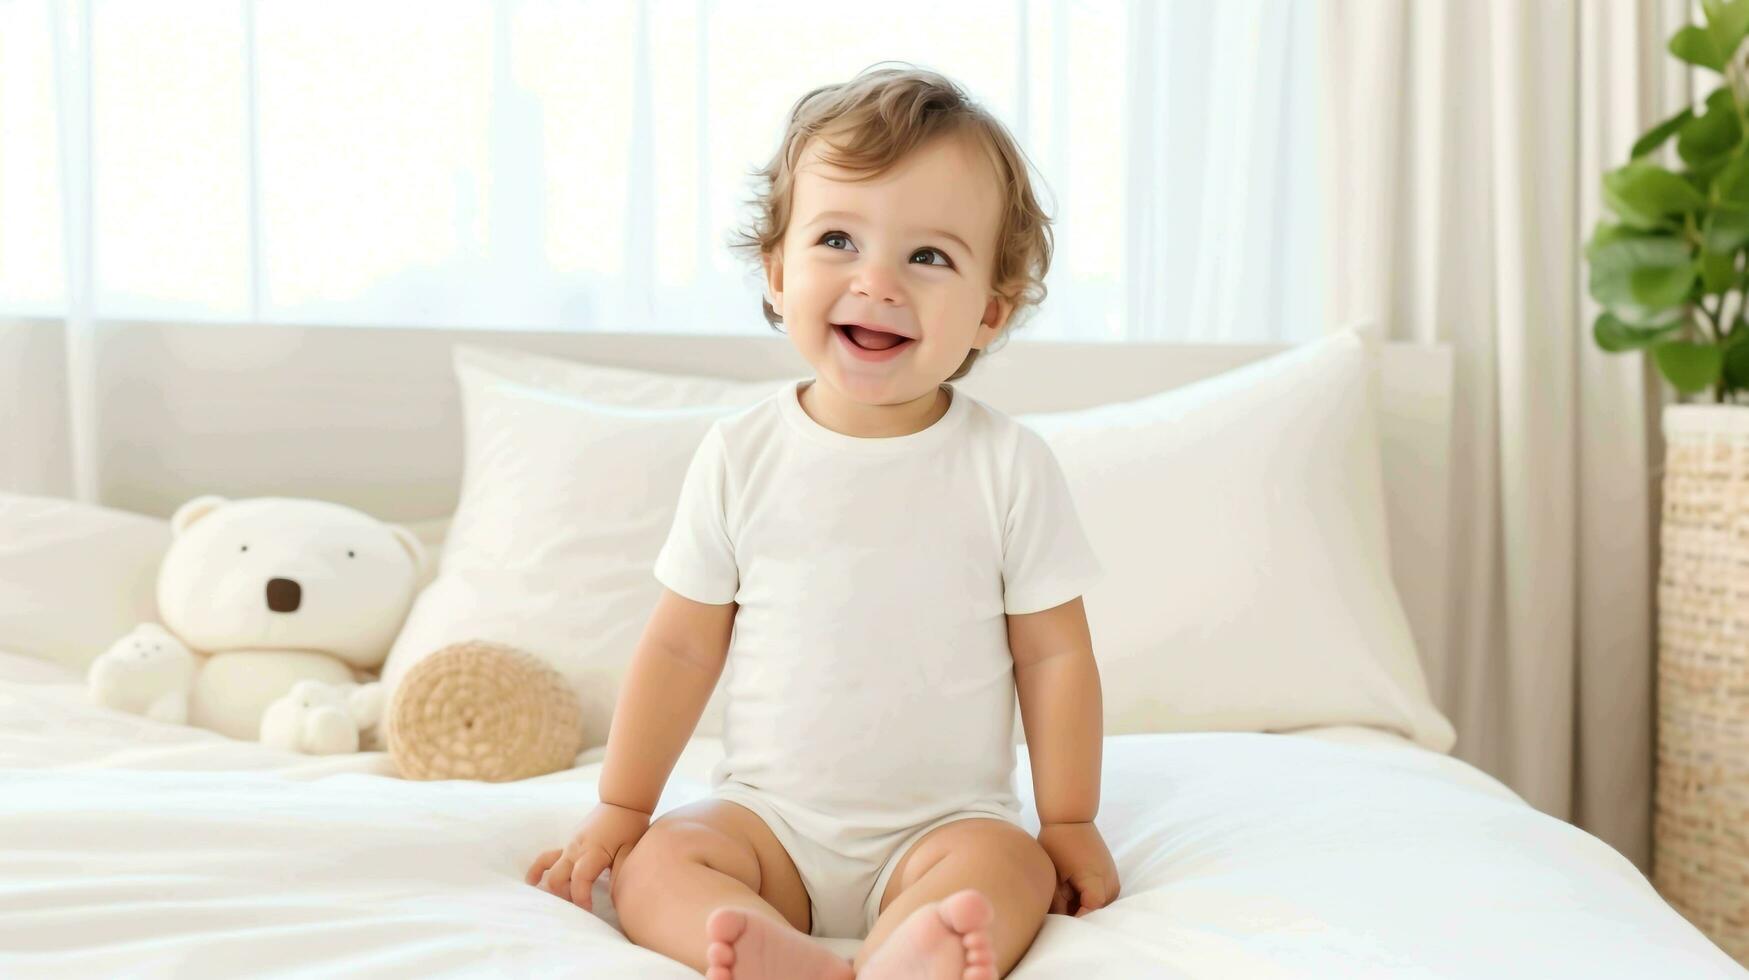 A delightful scene portrays a baby's playfulness, with a white shirt bodysuit mockup worn by the little one, set against a serene white bed background, AI generated photo